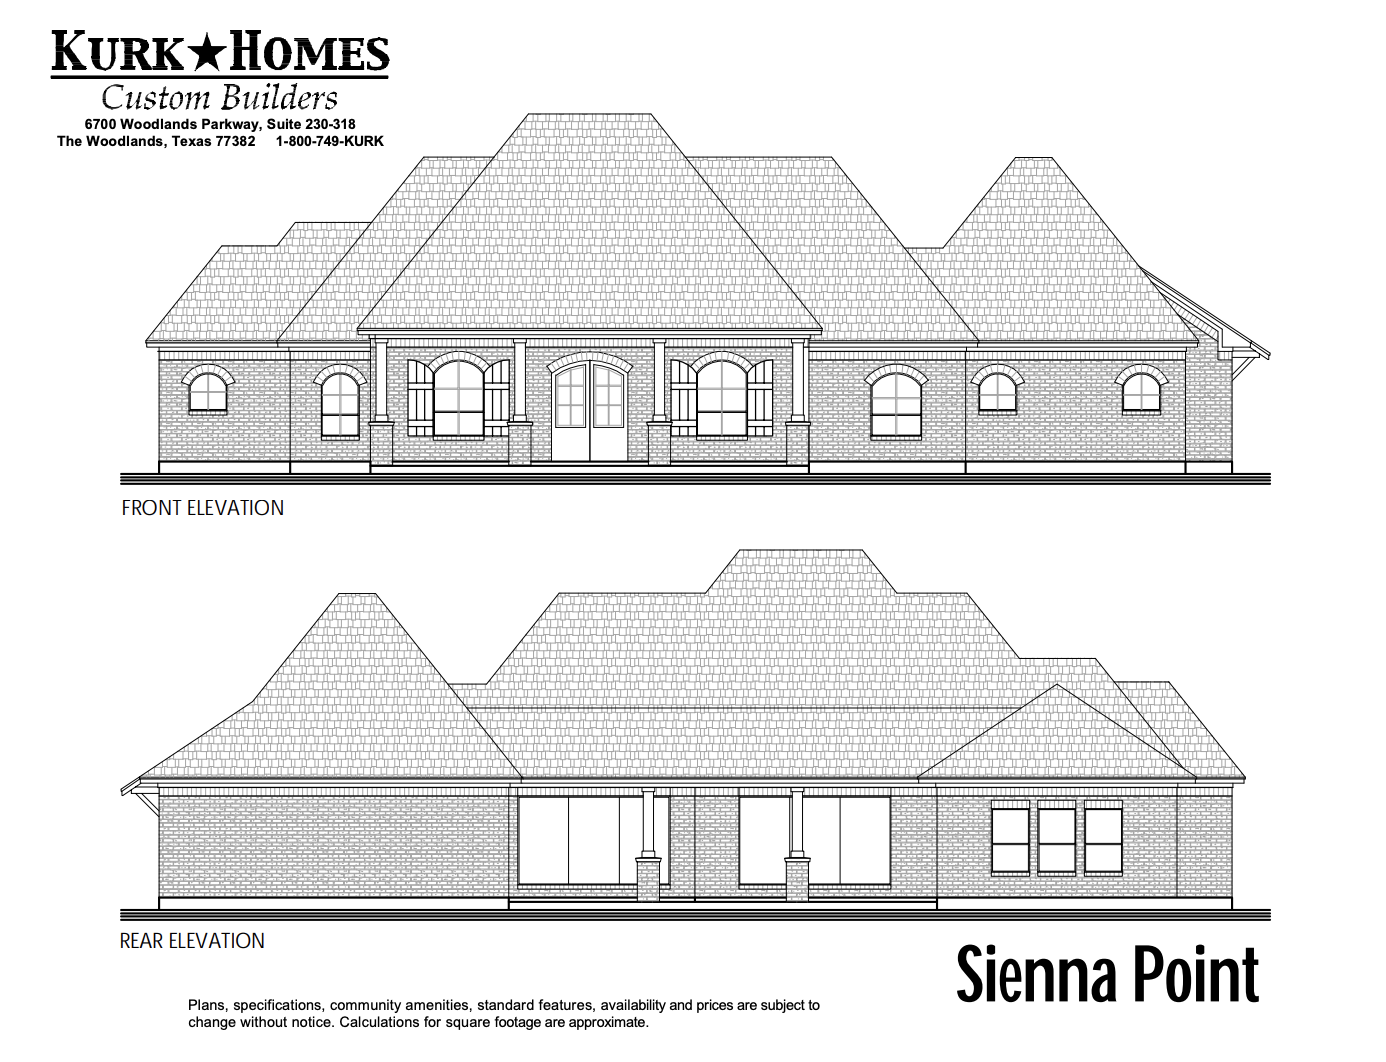 The Sienna Point - Front Elevation